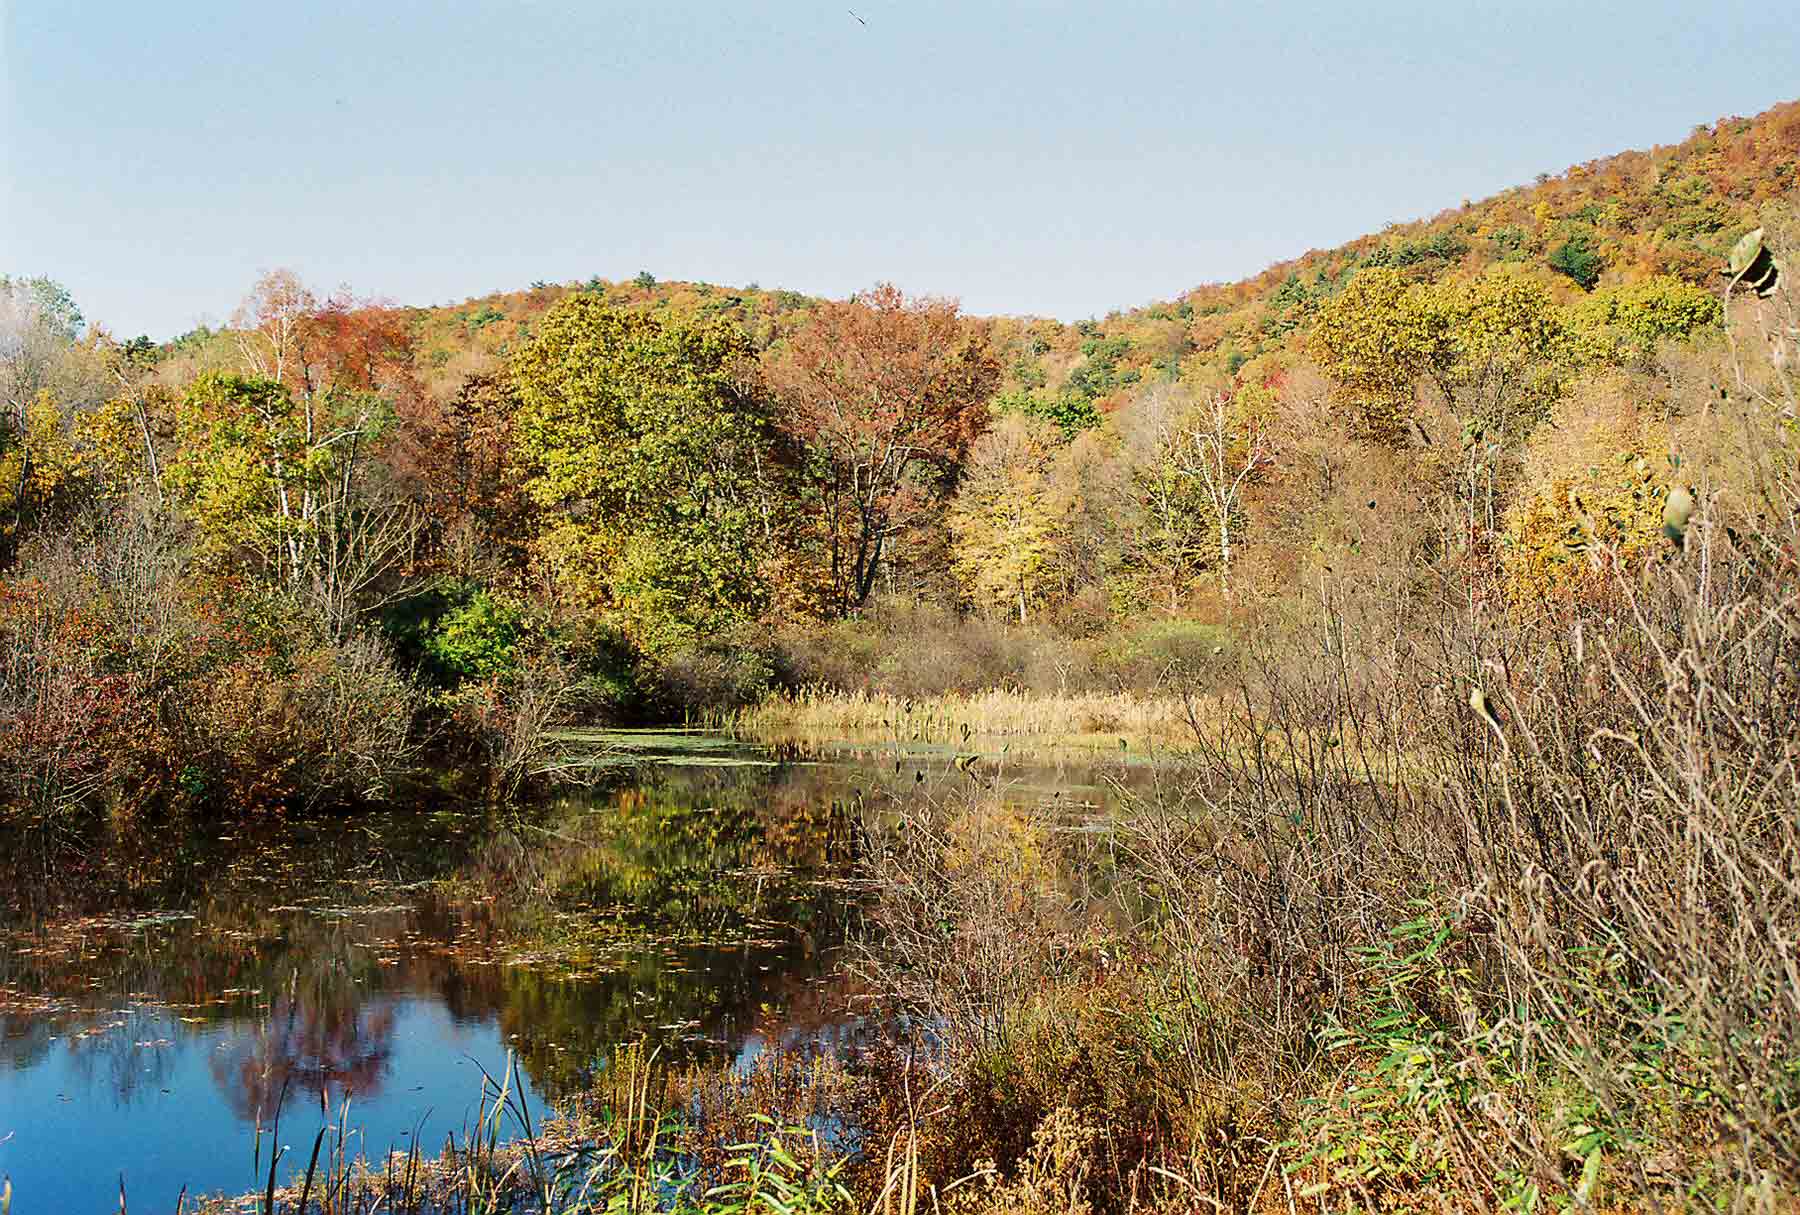 The soutbound AT reaches Schaghticoke Road once it reaches the valley floor near Bull's Bridge (Mile 7.1). It follows the road for 0.3 miles, passing  this small pond. Picture obviously taken  in fall.    Courtesy dlcul@conncoll.edu